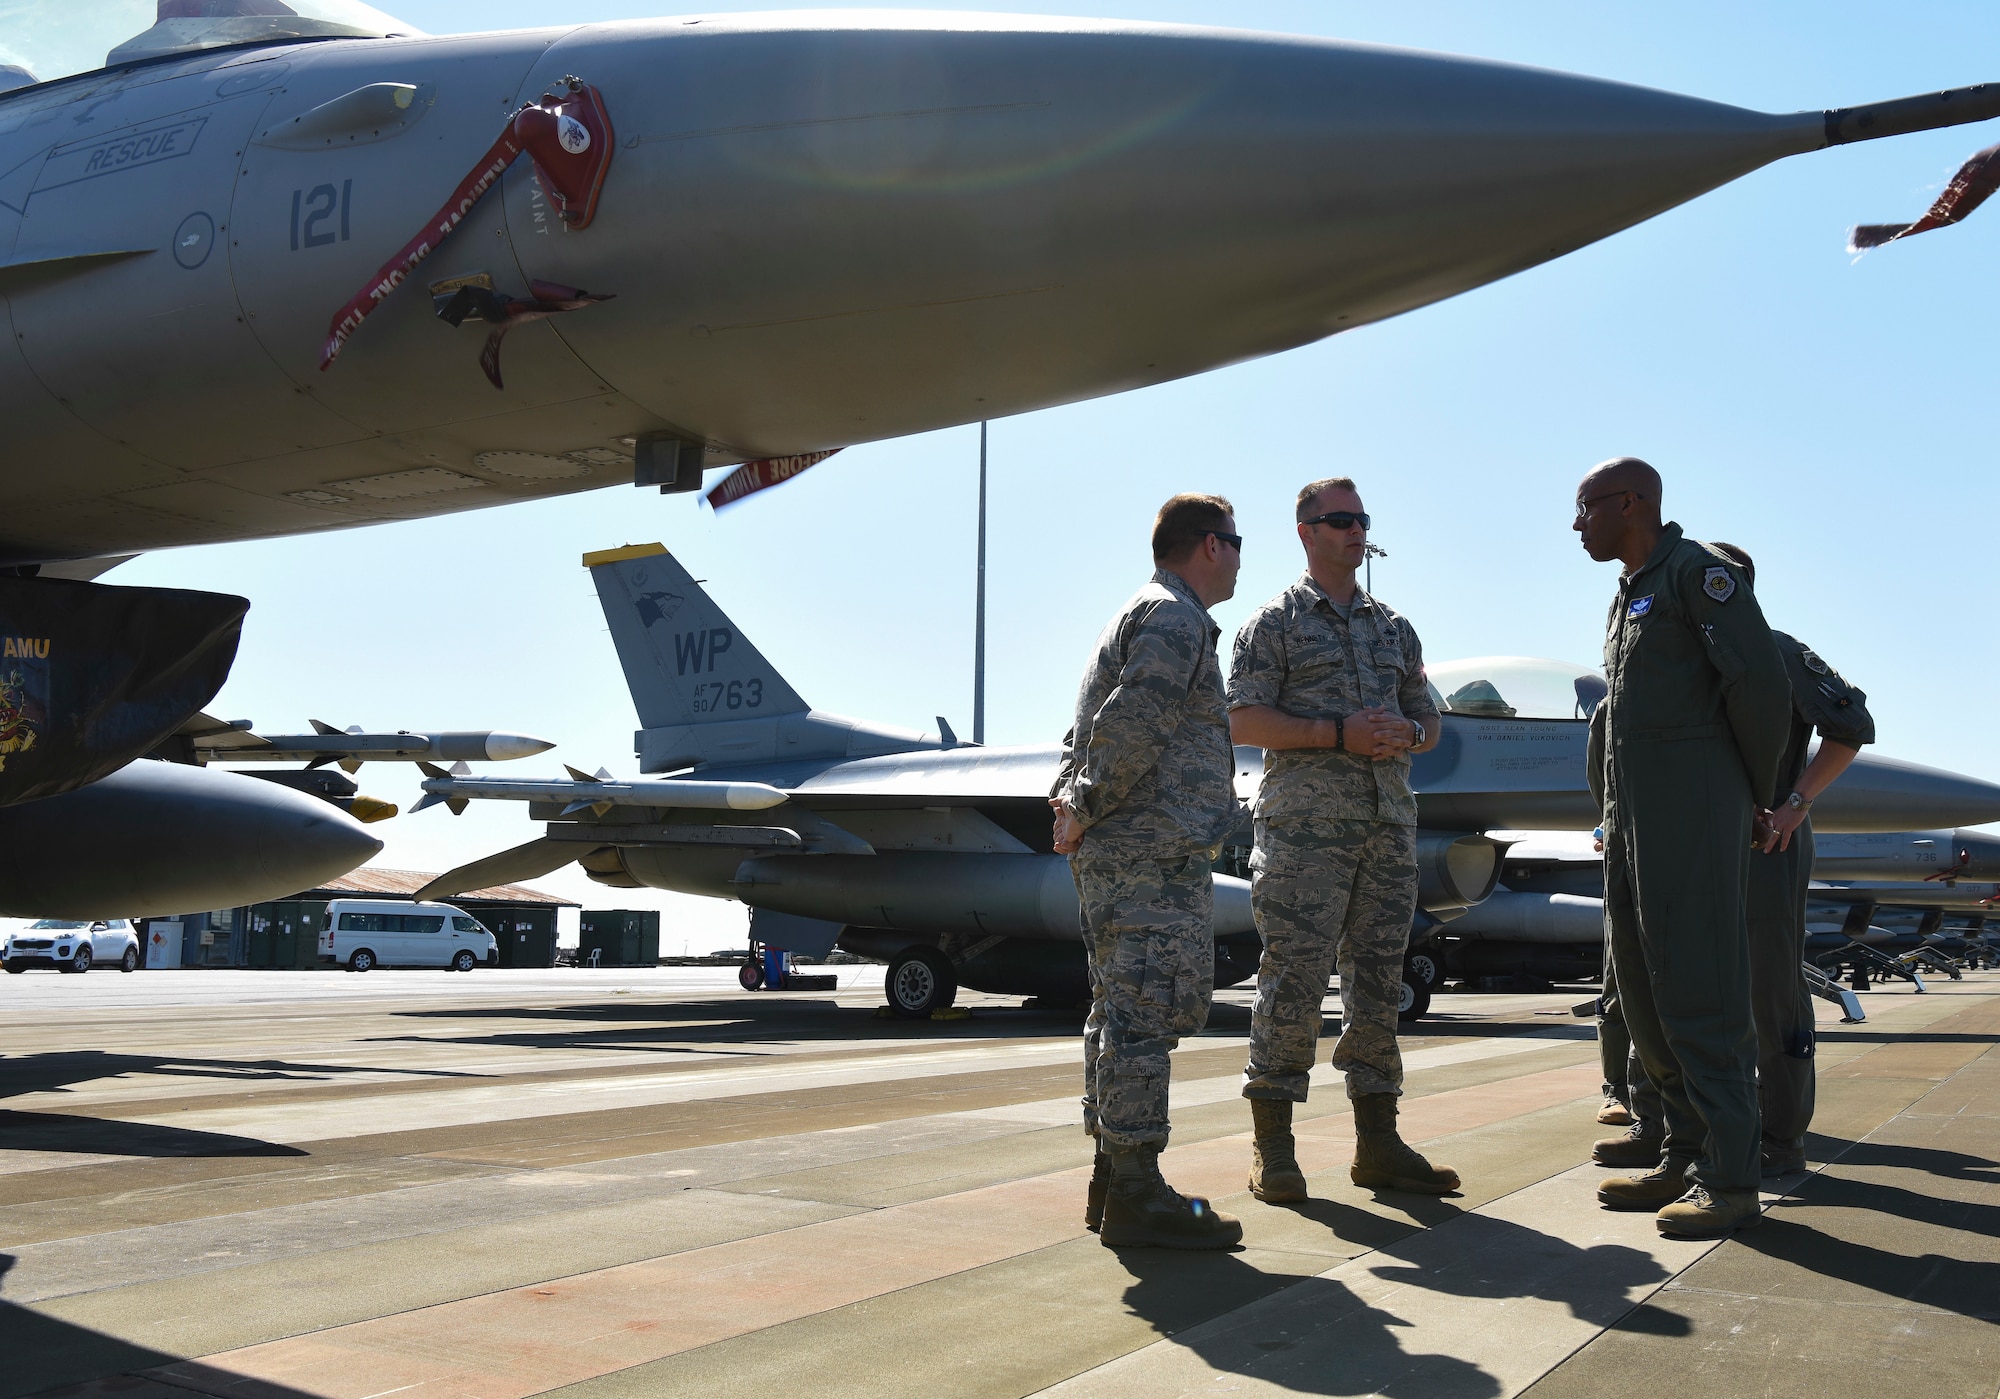 U.S. Air Force Gen. CQ Brown, Jr., Pacific Air Forces commander (right), speaks with Senior Master Sgt. Eric Bennett (middle), 80th Aircraft Maintenance Unit superintendent, and Capt. Donovan Ricks (left), 80th AMU officer in charge, during Exercise Pitch Black 2018, at Royal Australian Air Force Base Darwin, Australia, Aug. 13, 2018. Brown, who started his career at Kunsan Air Base, Republic of Korea, visited with participating Airmen from the 8th Fighter Wing. (U.S. Air Force Photo by Senior Airman Savannah Waters)